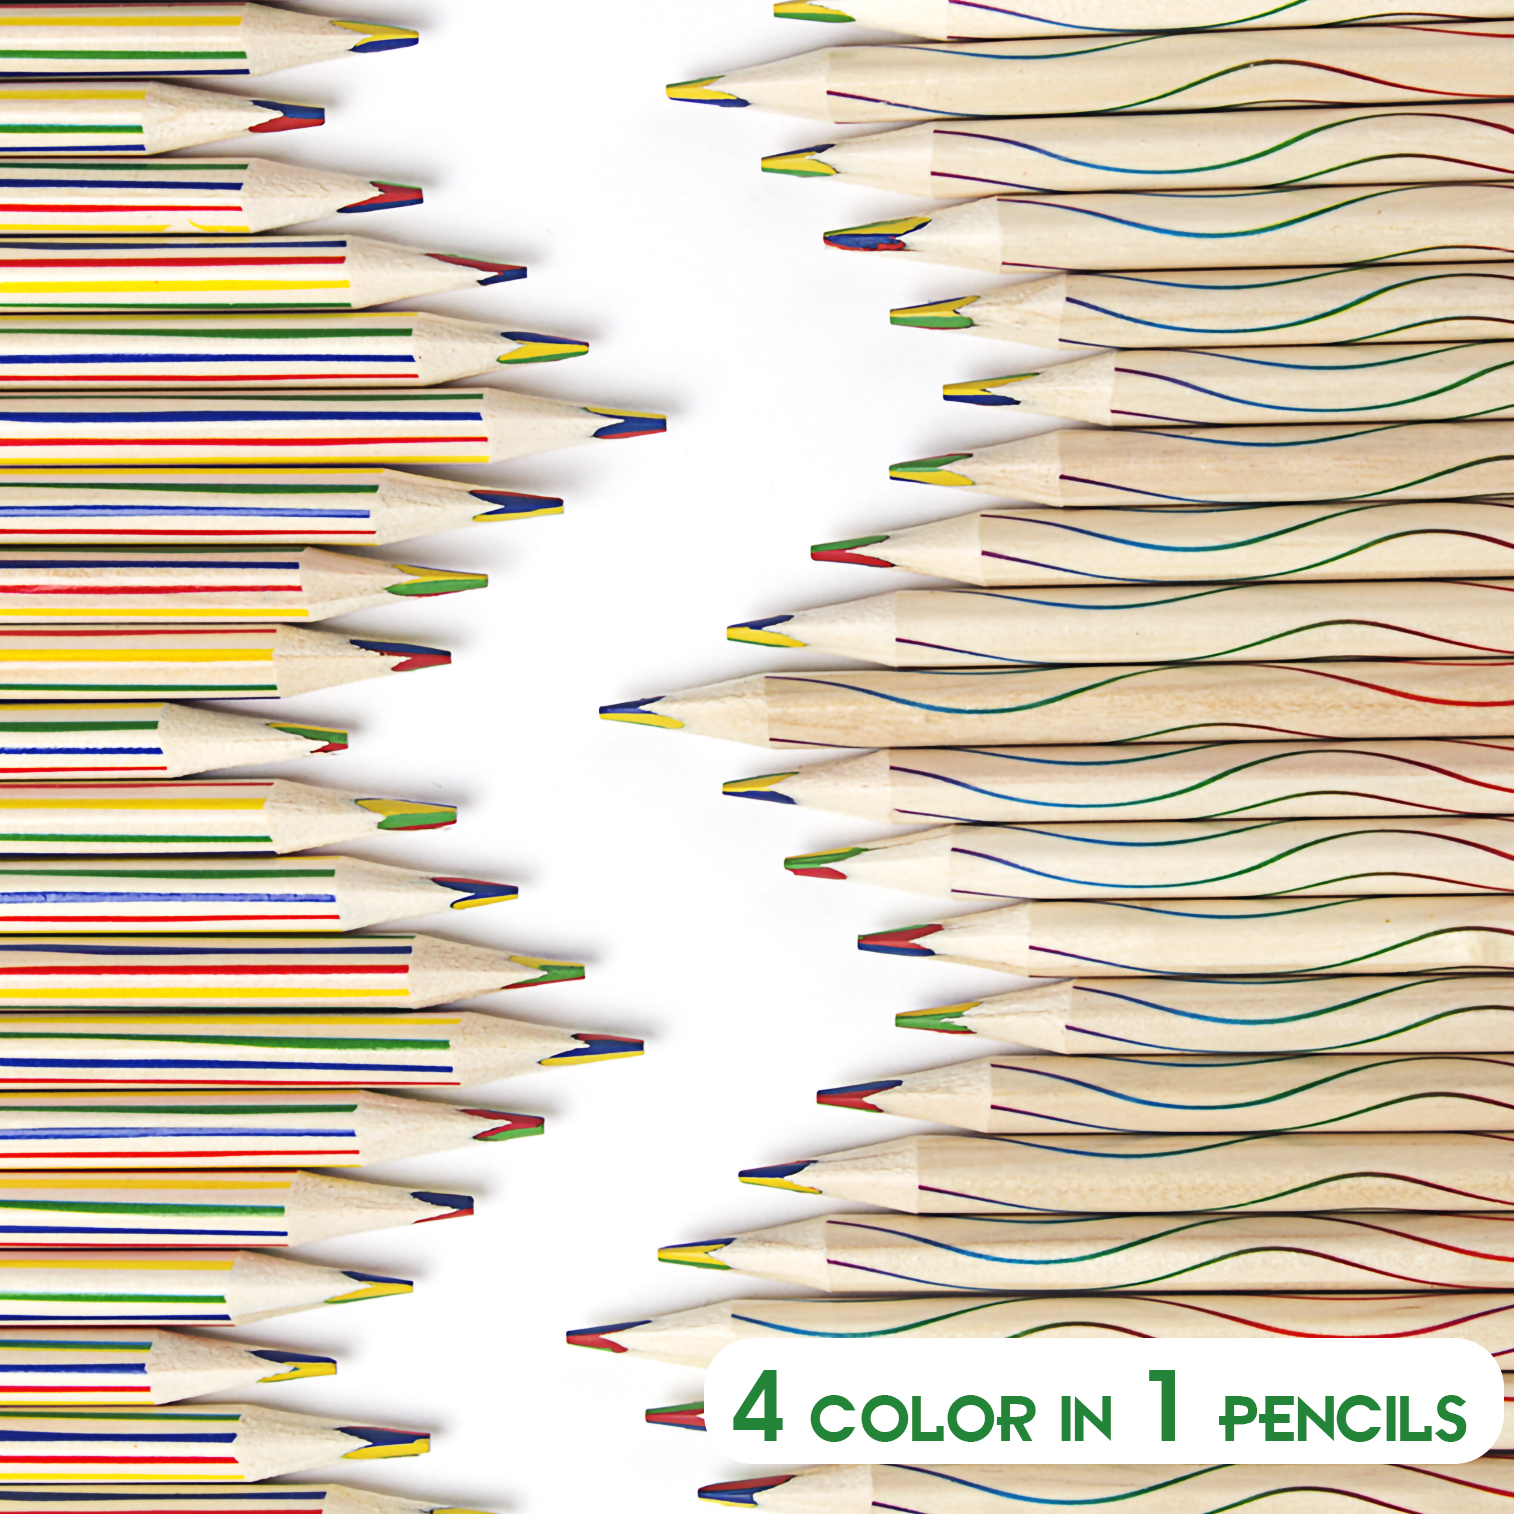 30 Pieces Rainbow Colored Pencils for Kids, 4 in 1 Color Pencils, Easter Pencil Gift Rainbow Pencil for Kids, Multi Colored Pencil, Fun Pencils - image 5 of 7